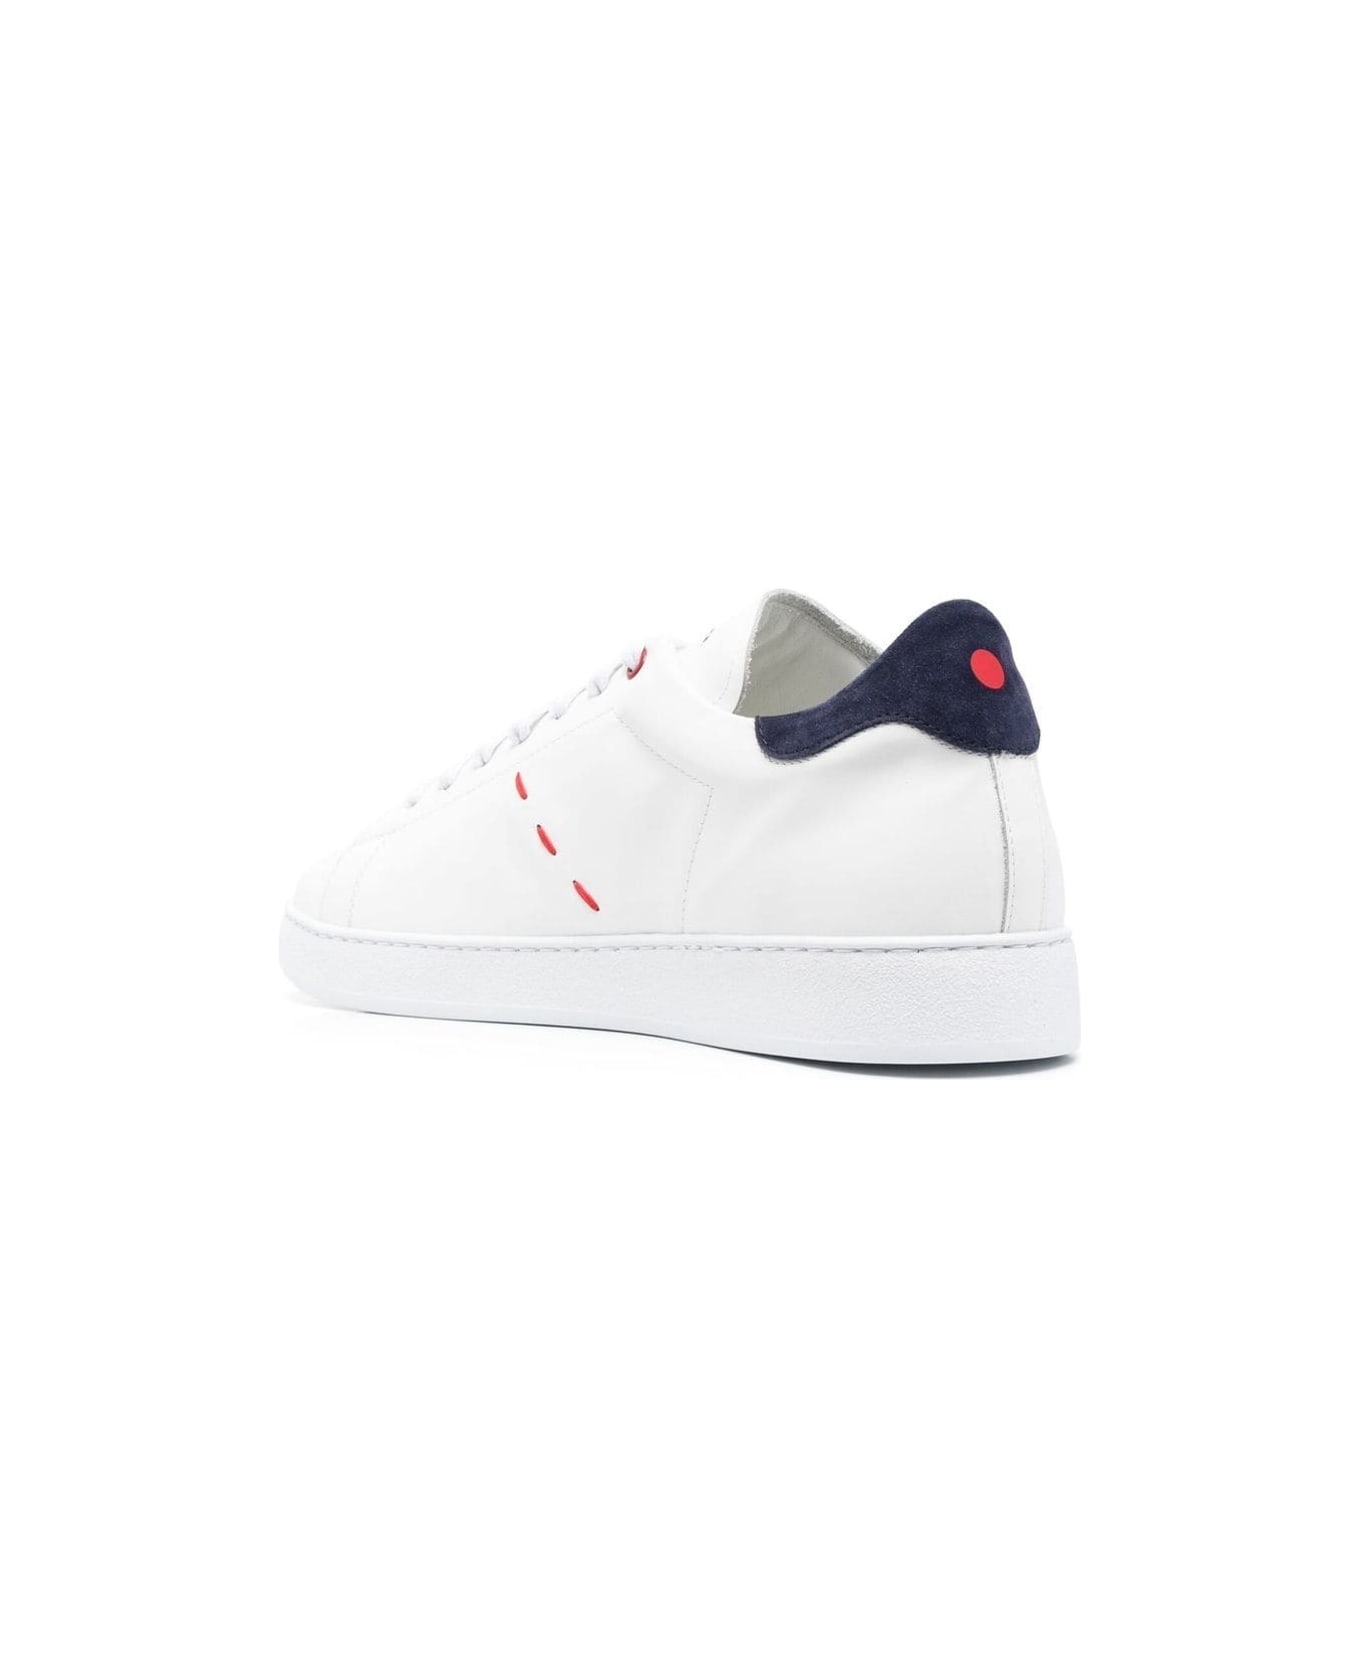 Kiton White And Blue Sneakers With Logo And Contrasting Stitching In Leather Man - White スニーカー